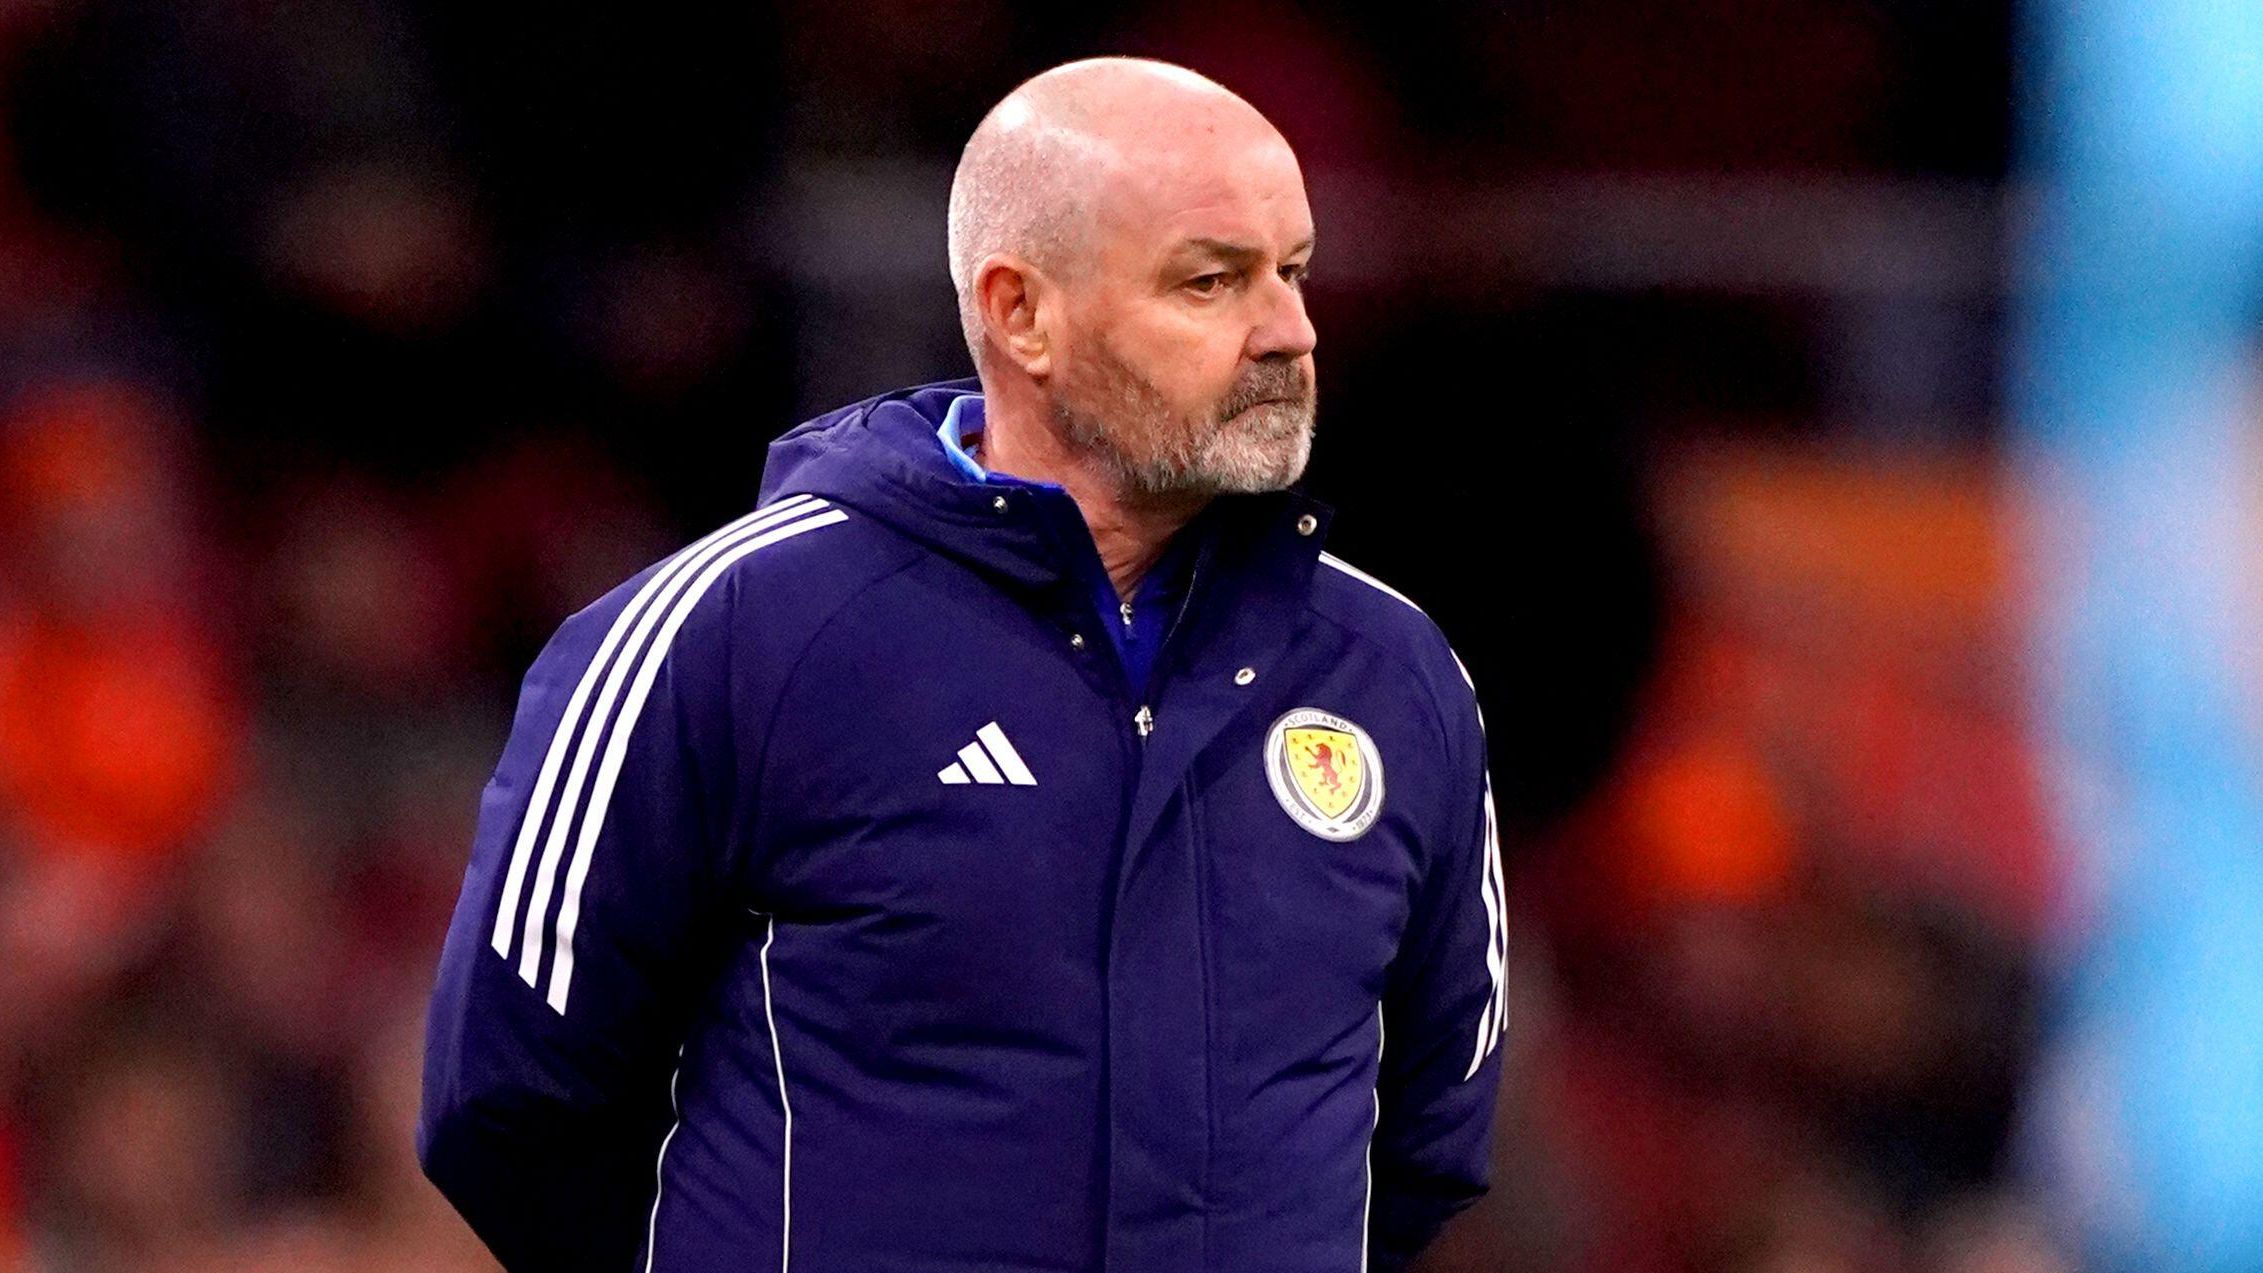 Steve Clarke says Scotland players have lifted him after Netherlands loss